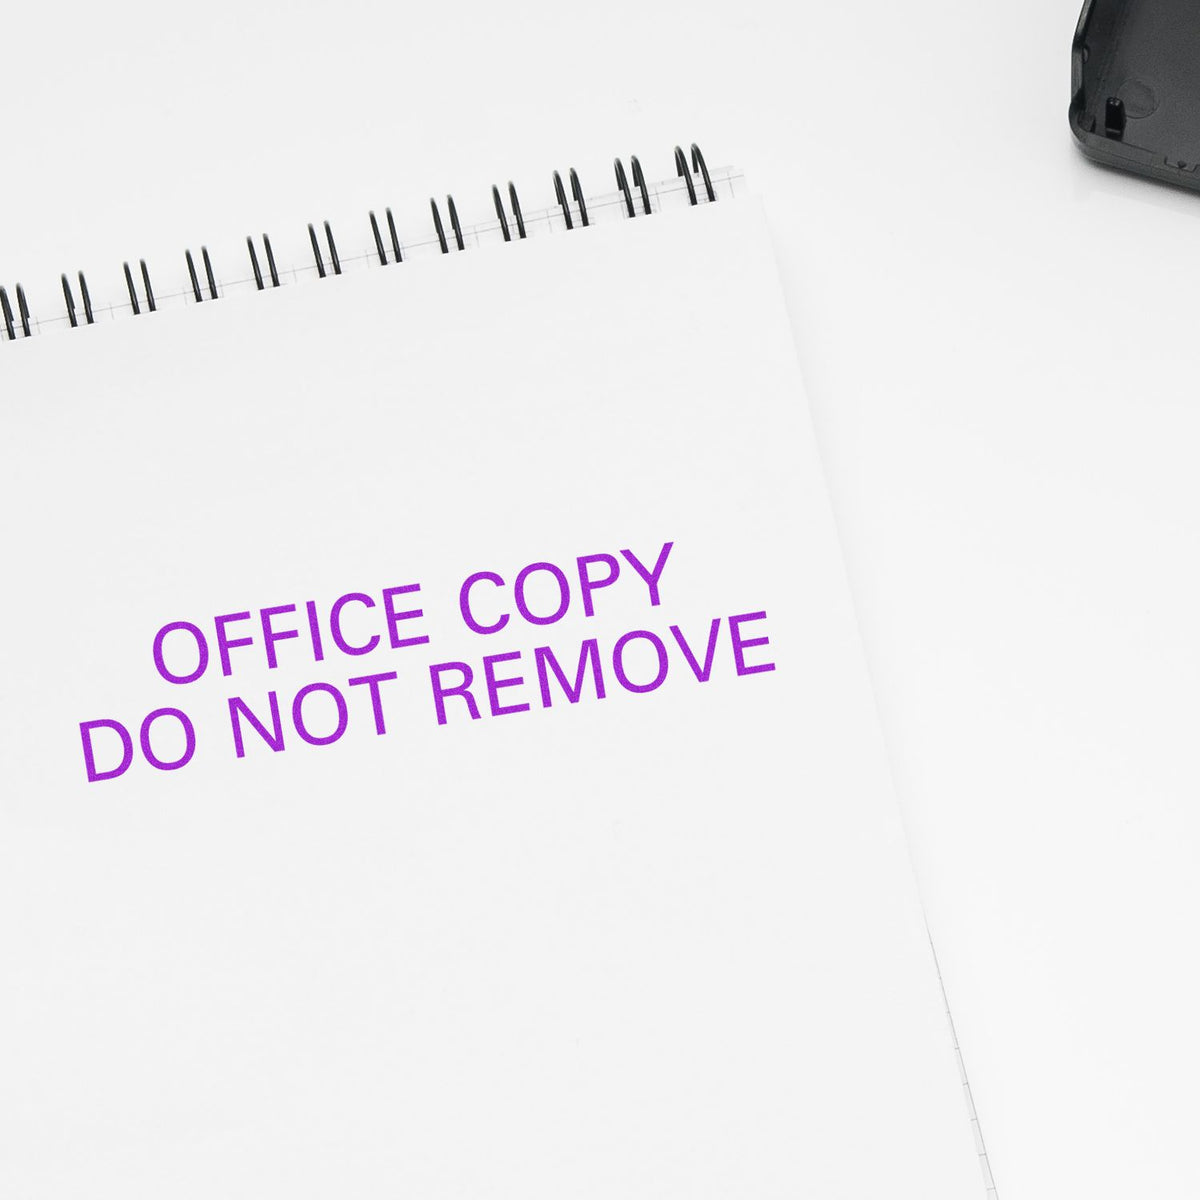 Large Pre-Inked Office Copy Do Not Remove Stamp In Use